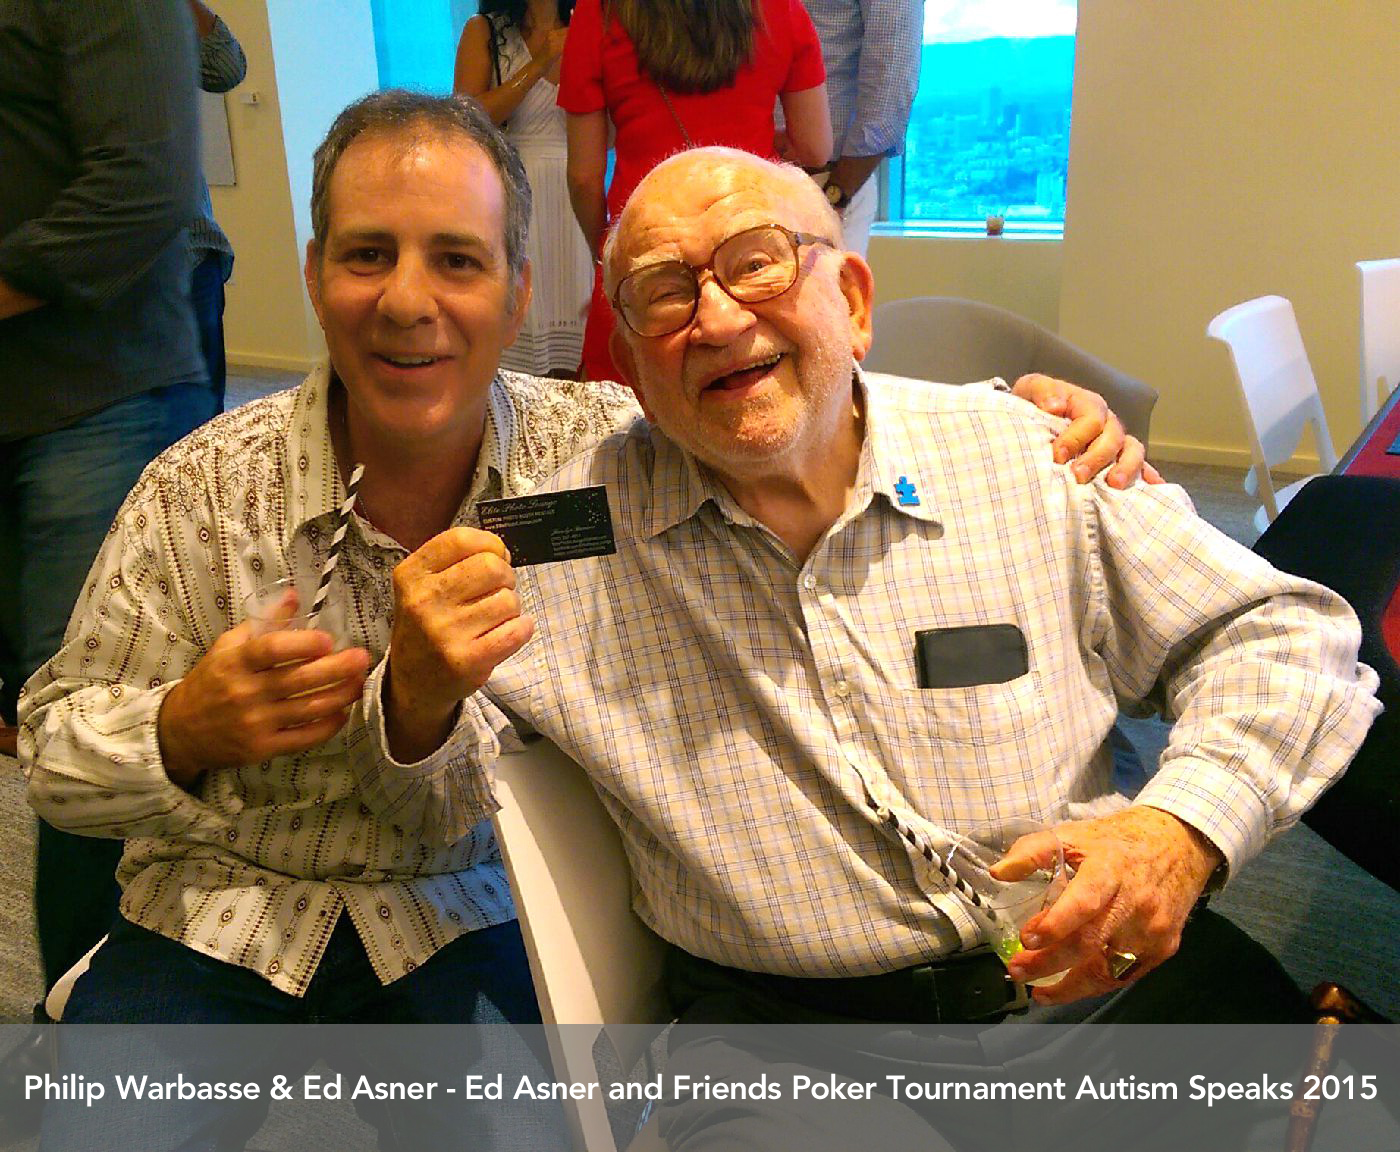 Ed Asner and Friends Celebrity Poker Tournament to support Autism Speaks